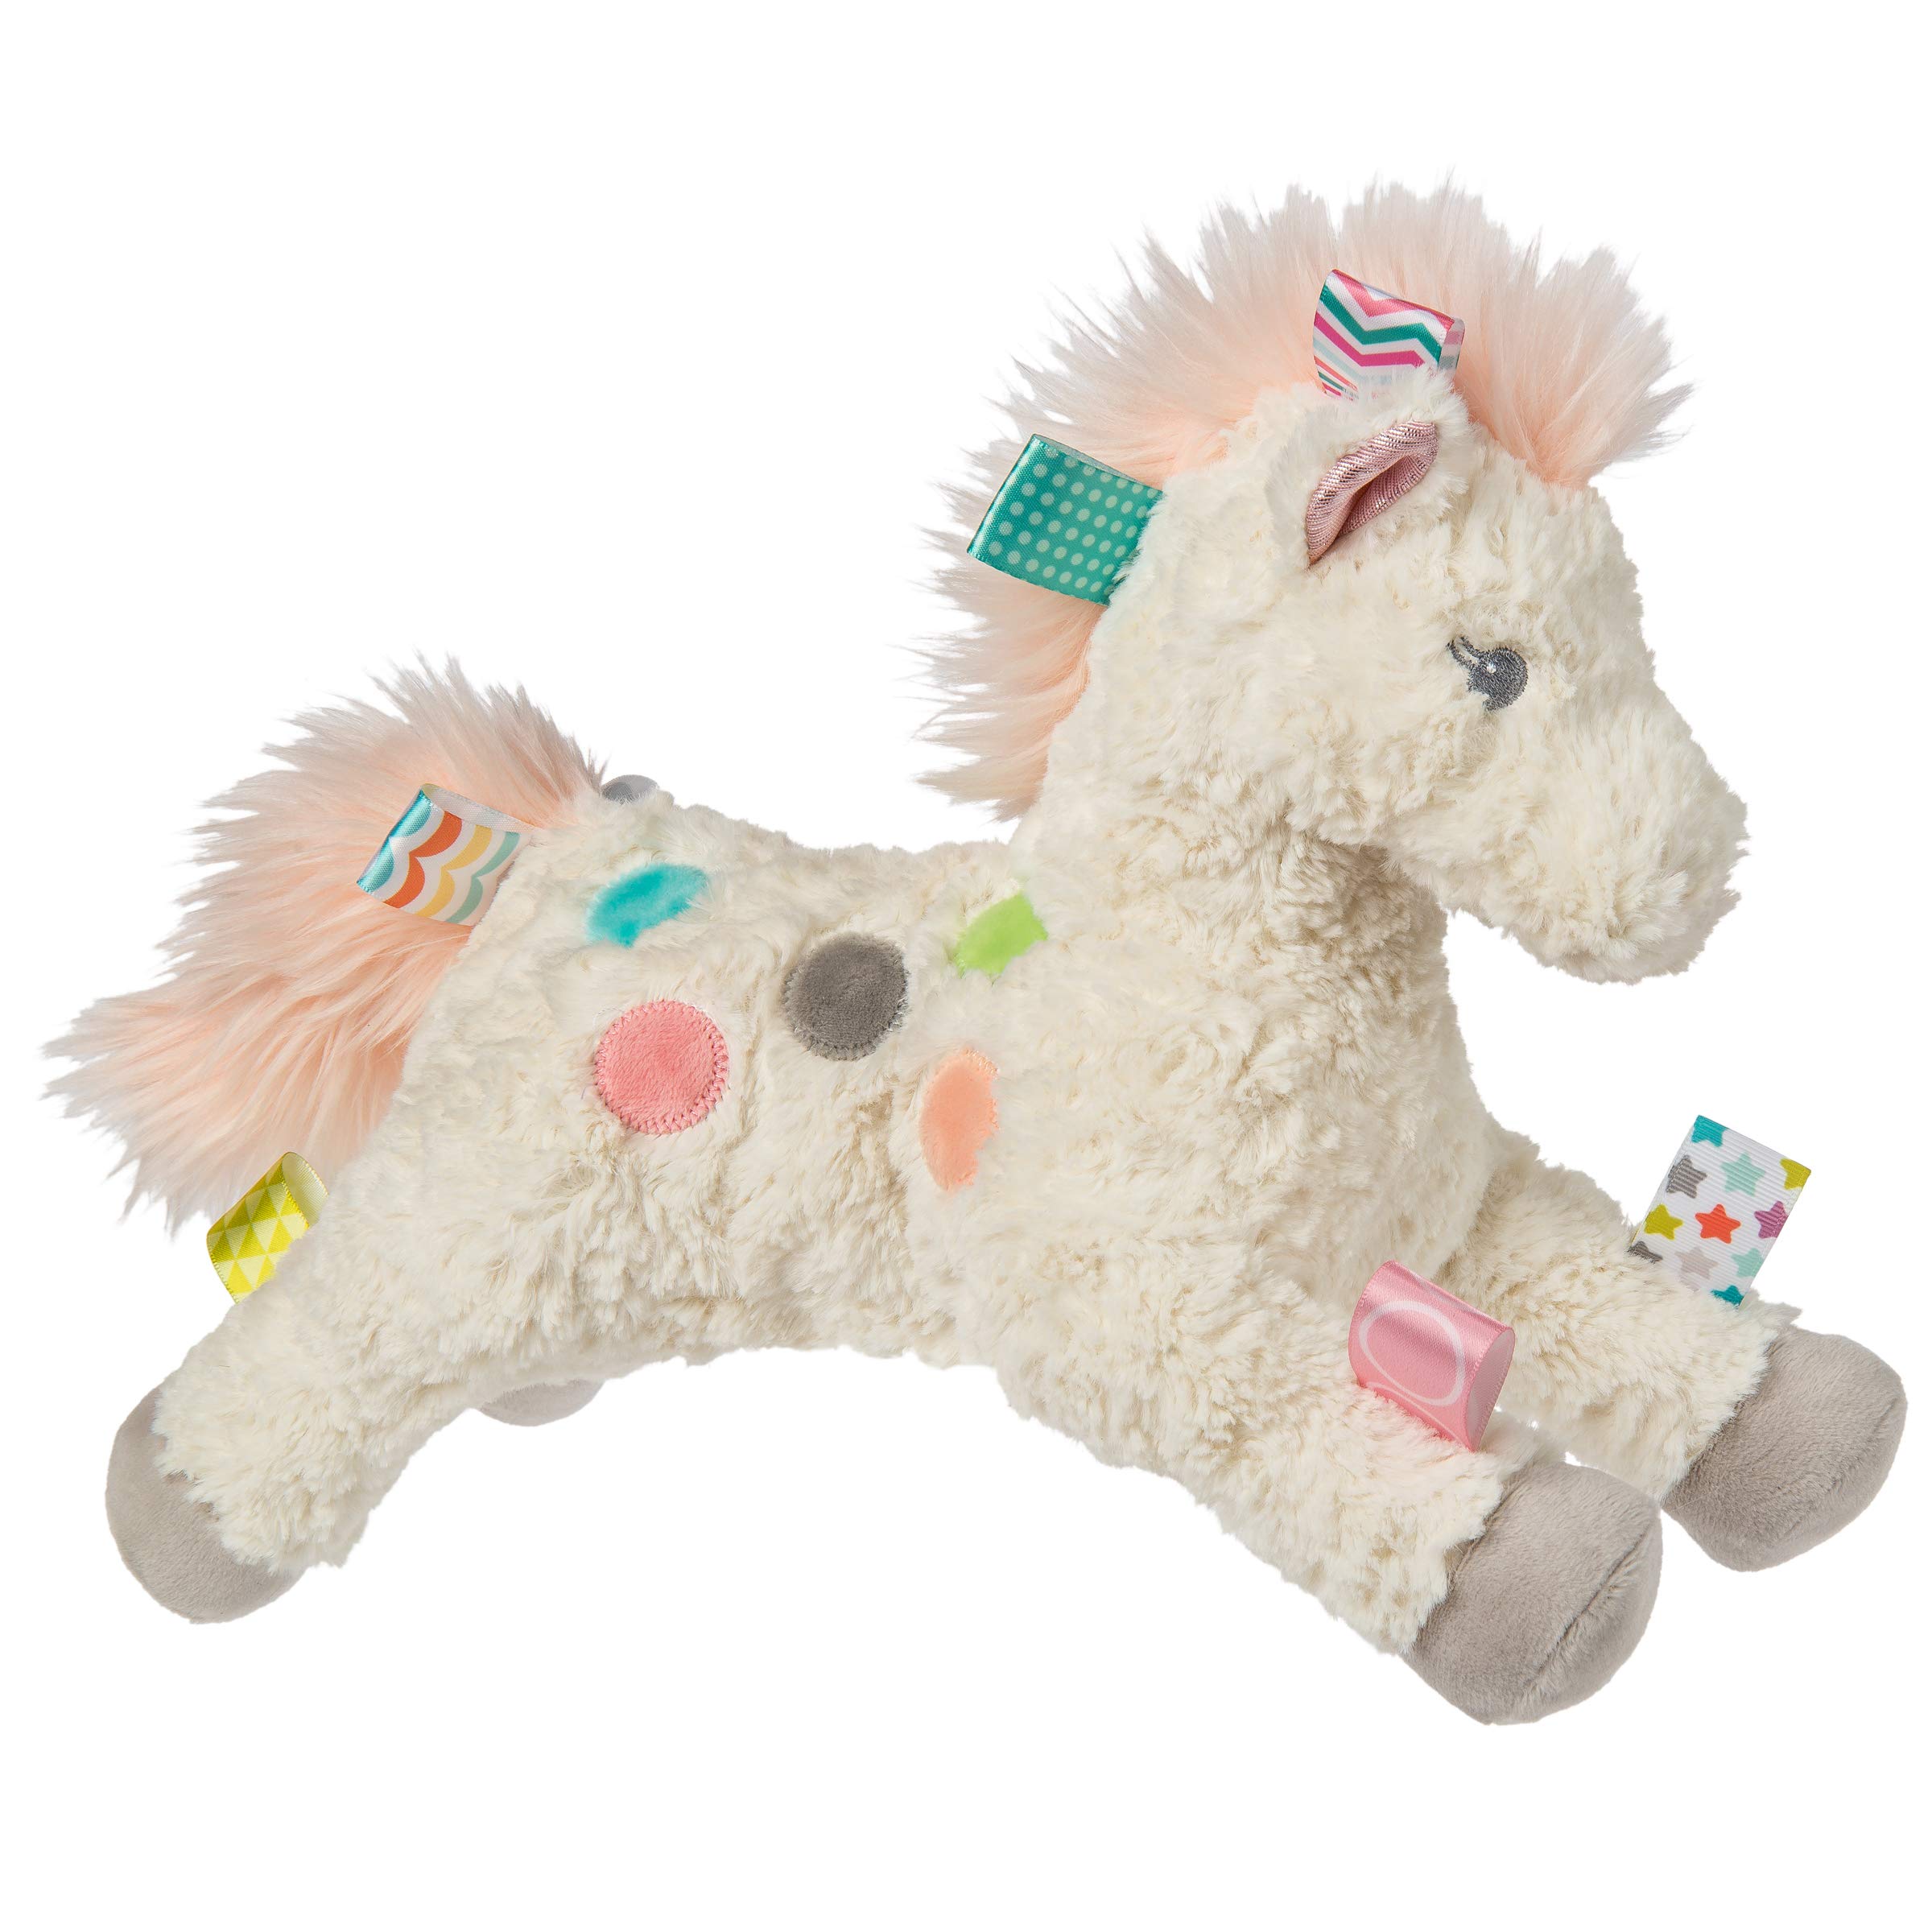 Mary Meyer Baby Gift Set Boxed Soft Toys, 3-Piece, Taggies Painted Pony